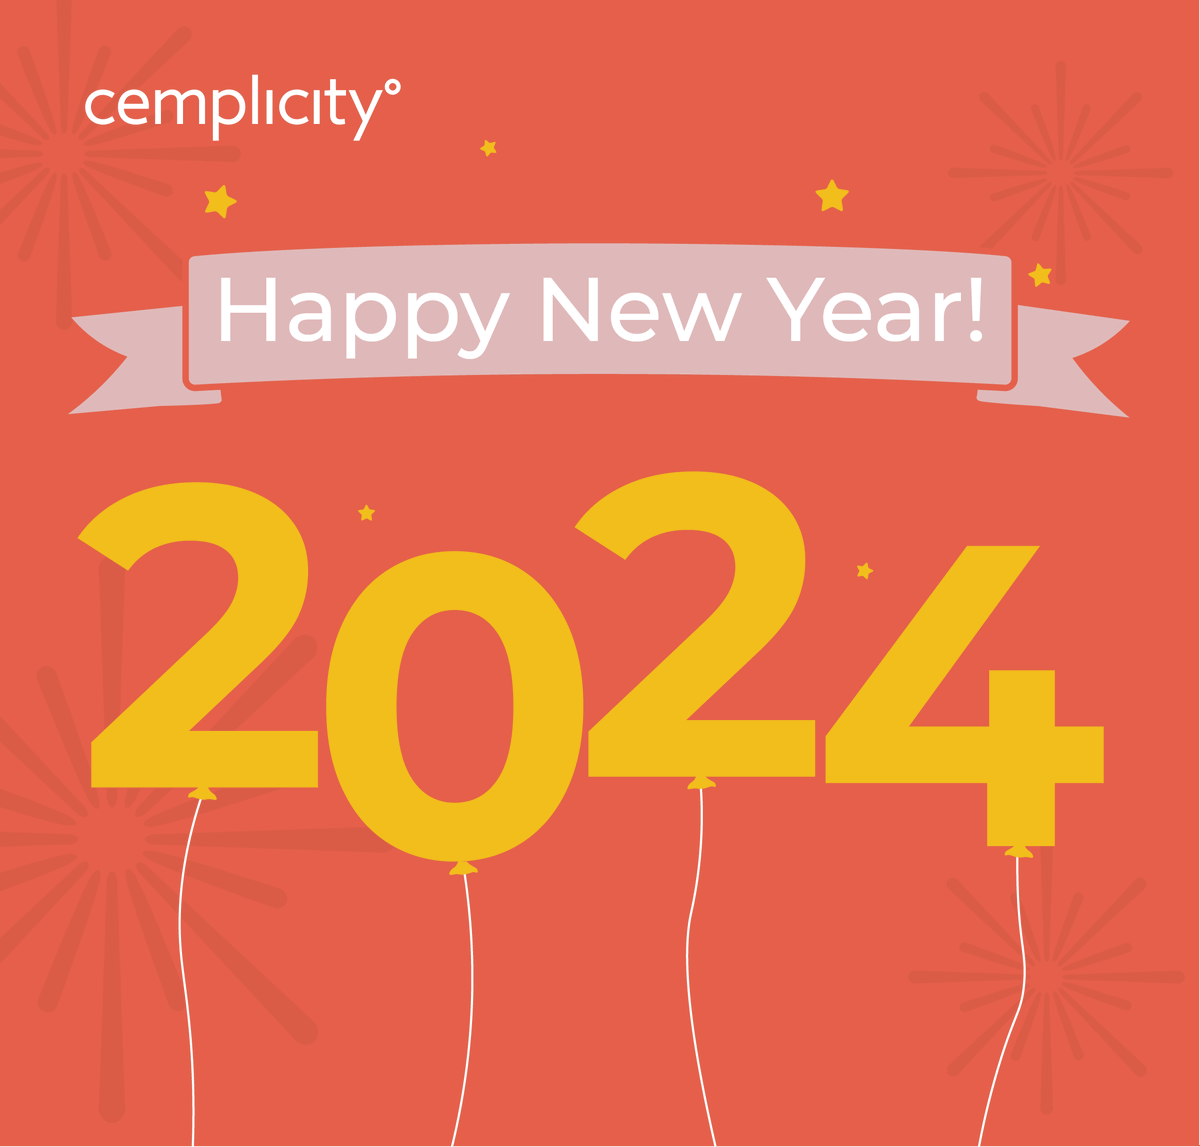 Wishing you a fantastic New Year from all of us at Cemplicity! 🎉✨